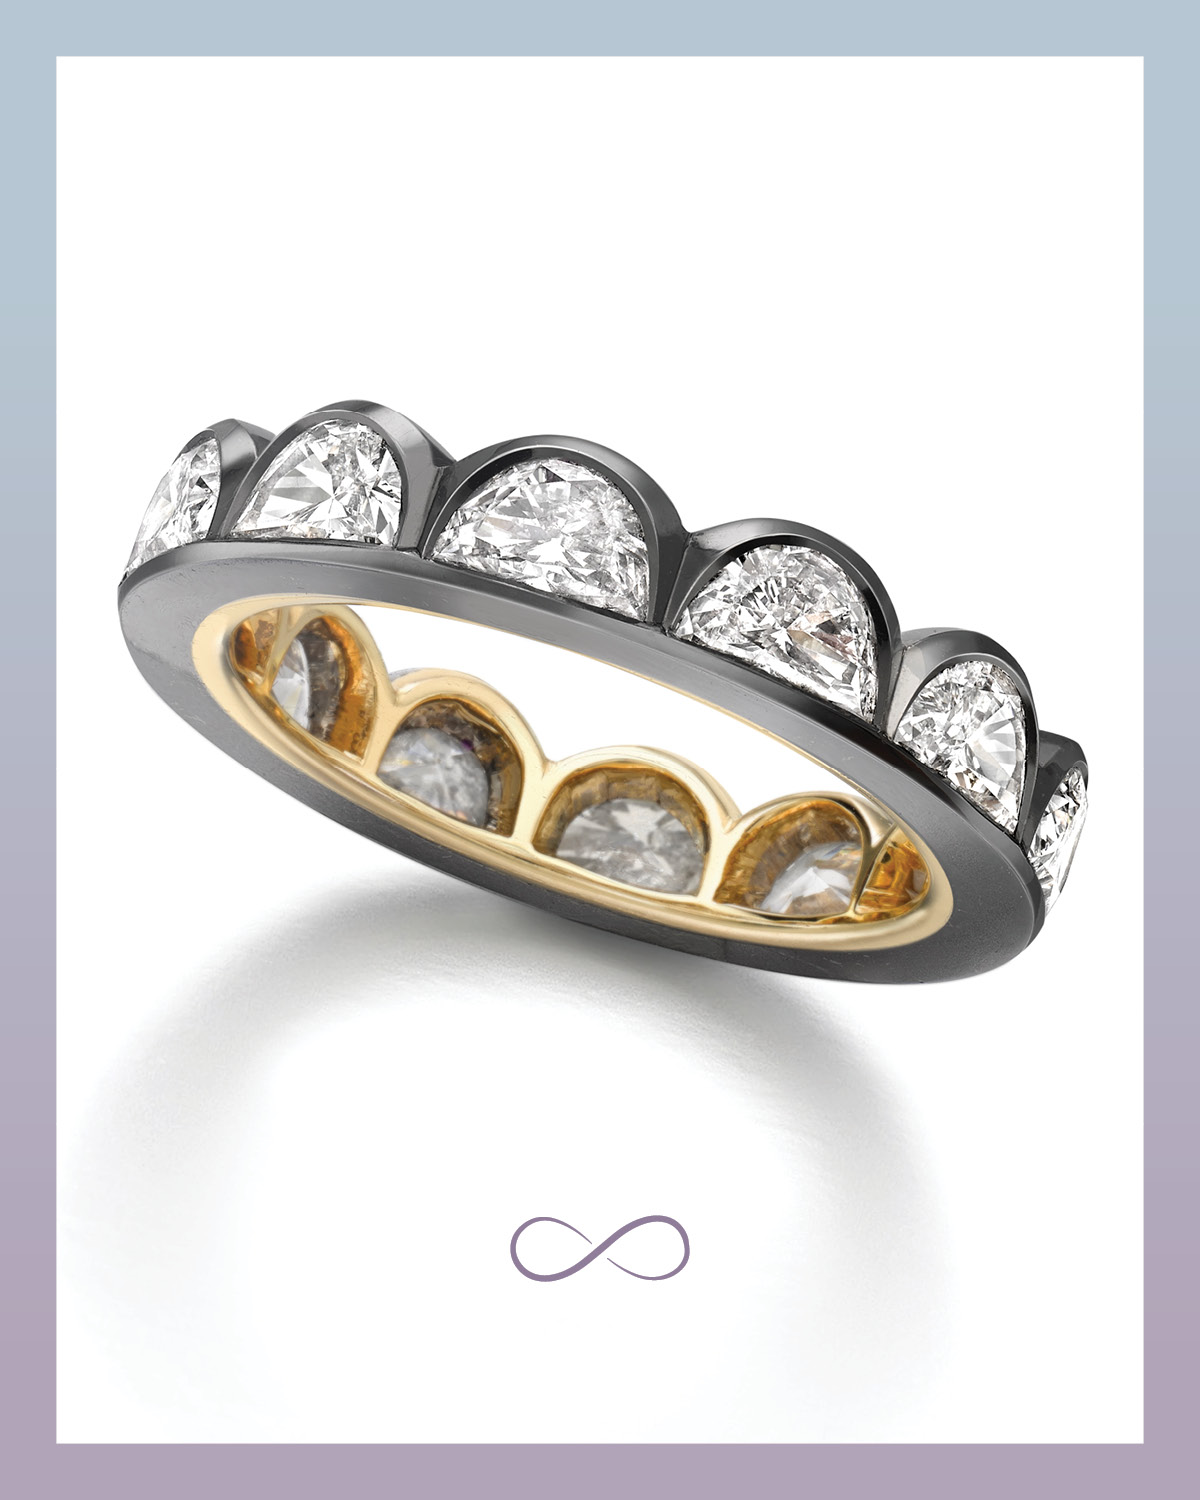 Moonshine diamond eternity band form Jessica McCormack featuring 12 half moon diamonds set in yellow gold and blackened white gold